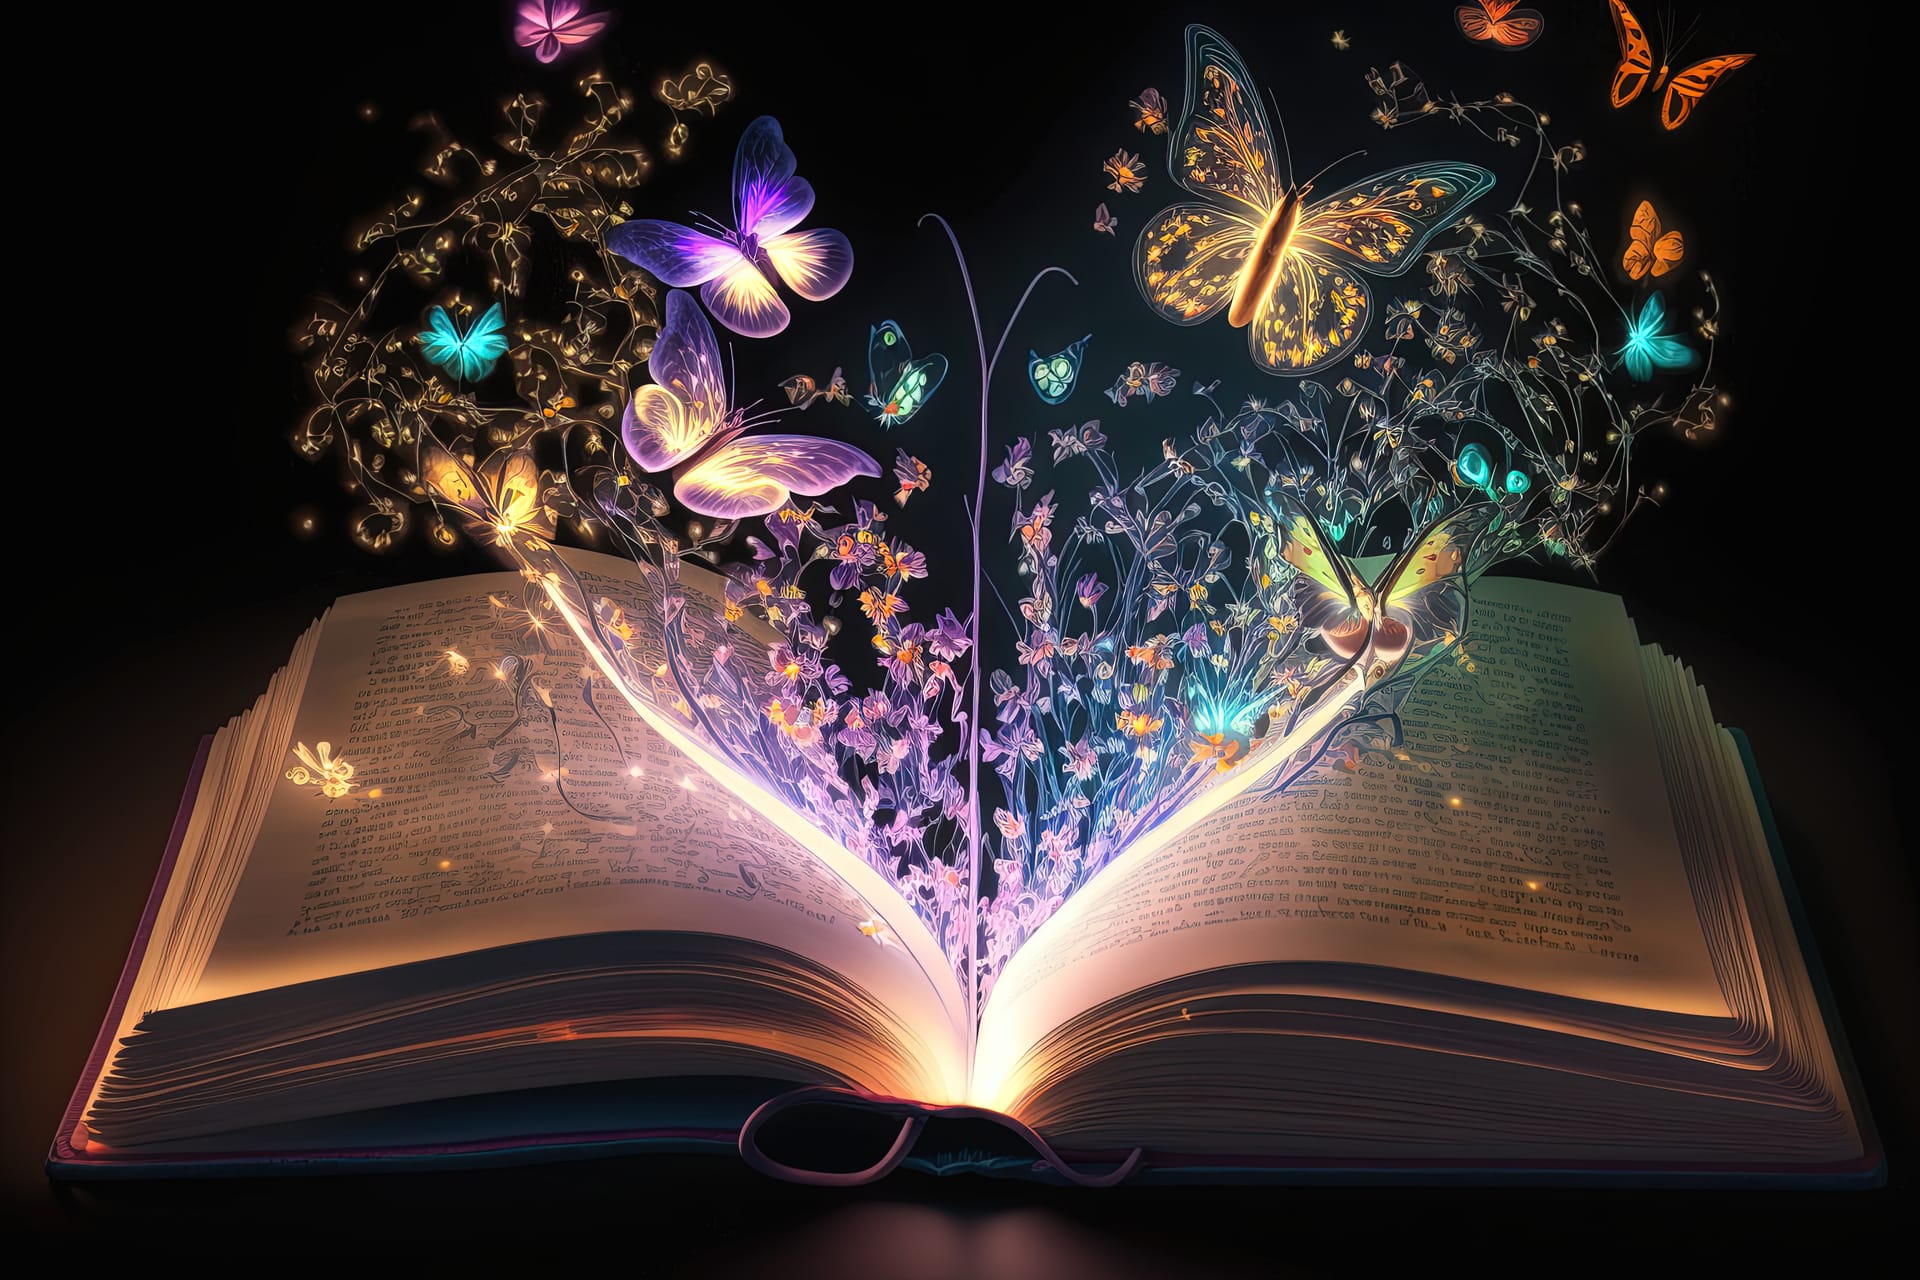 Open magic book with glowing flora butterflies image